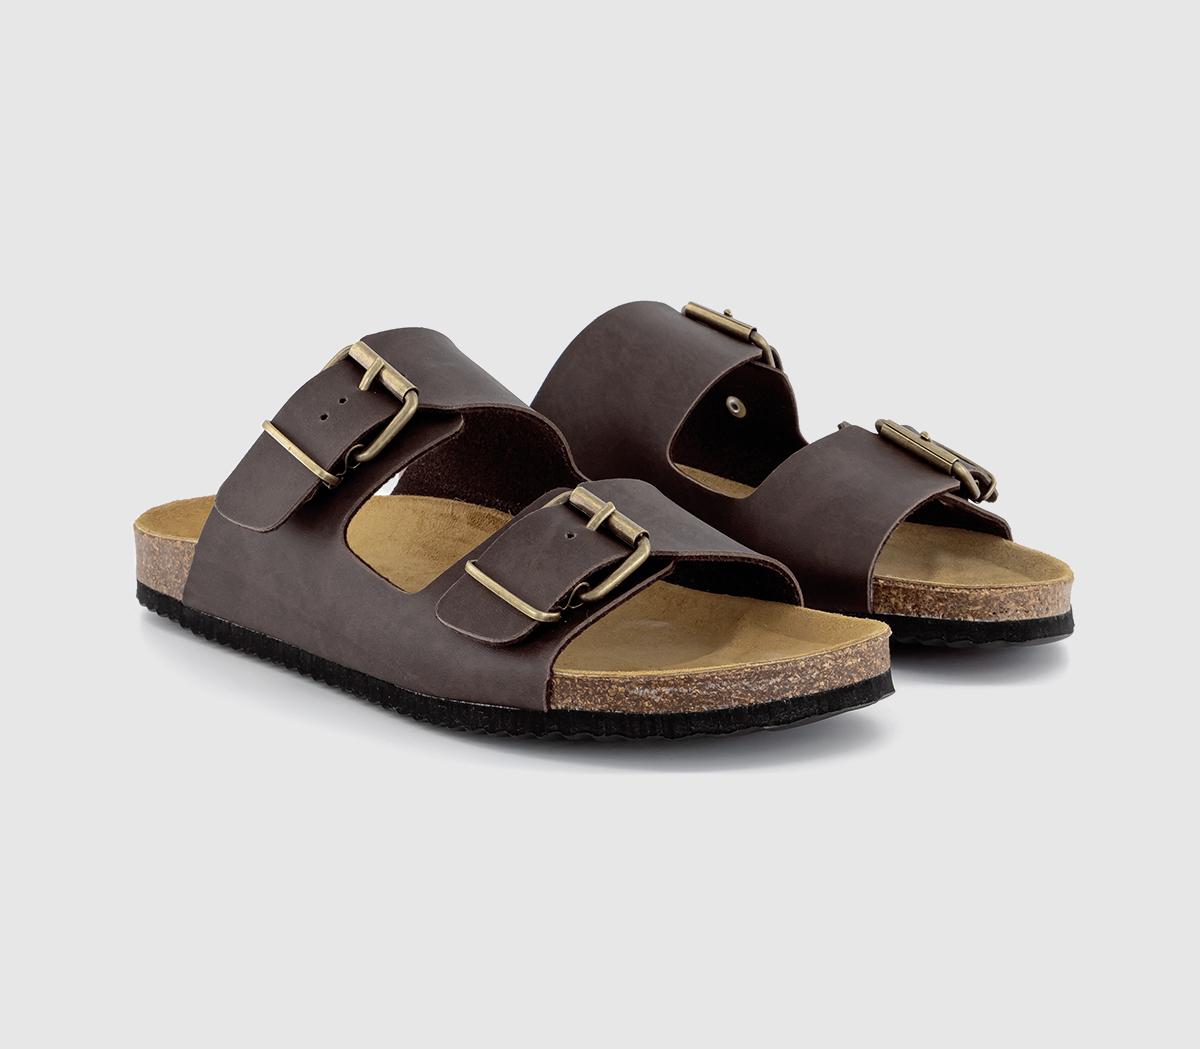 OFFICE Mens Livingstone Double Strap Footbeds Sandals Brown, 9